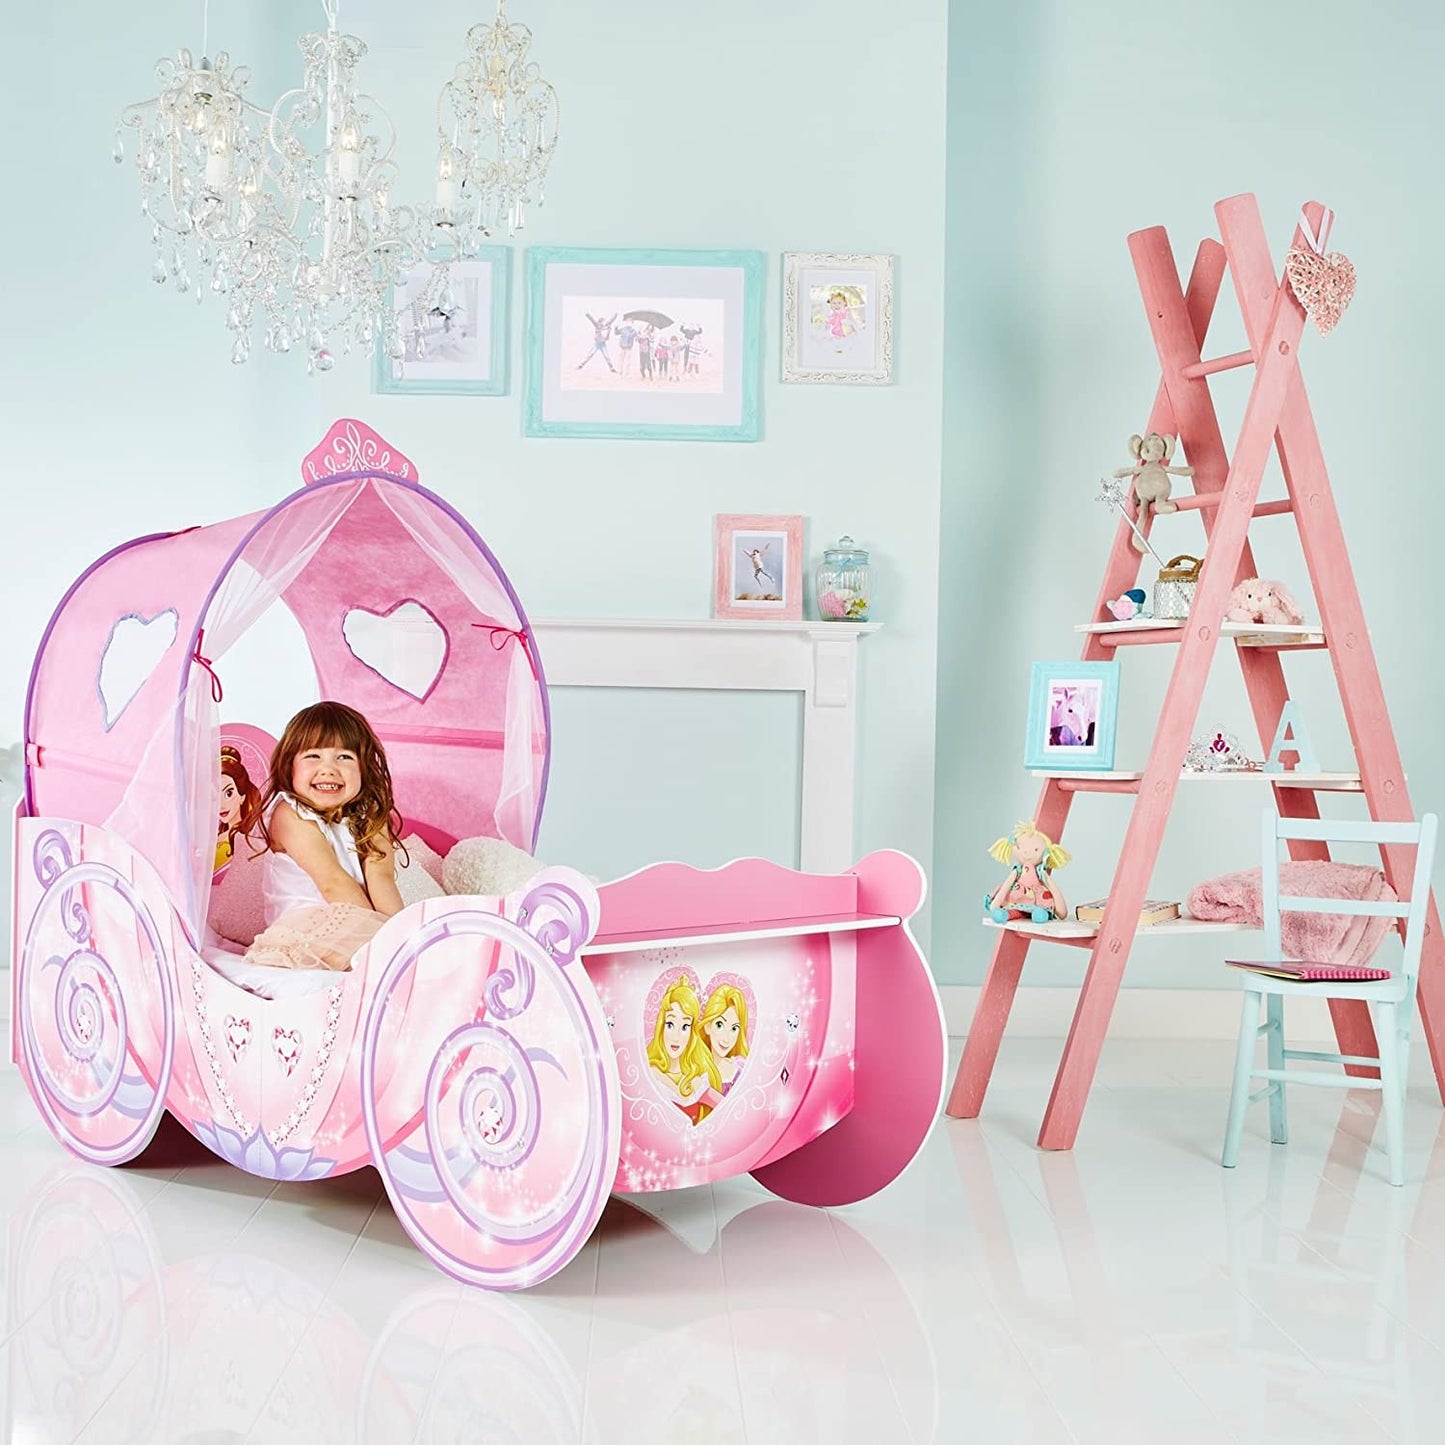 452DNY Princess Carriage Kids Toddler Bed by Hellohome, Pink, 160X87.5X136 Cm